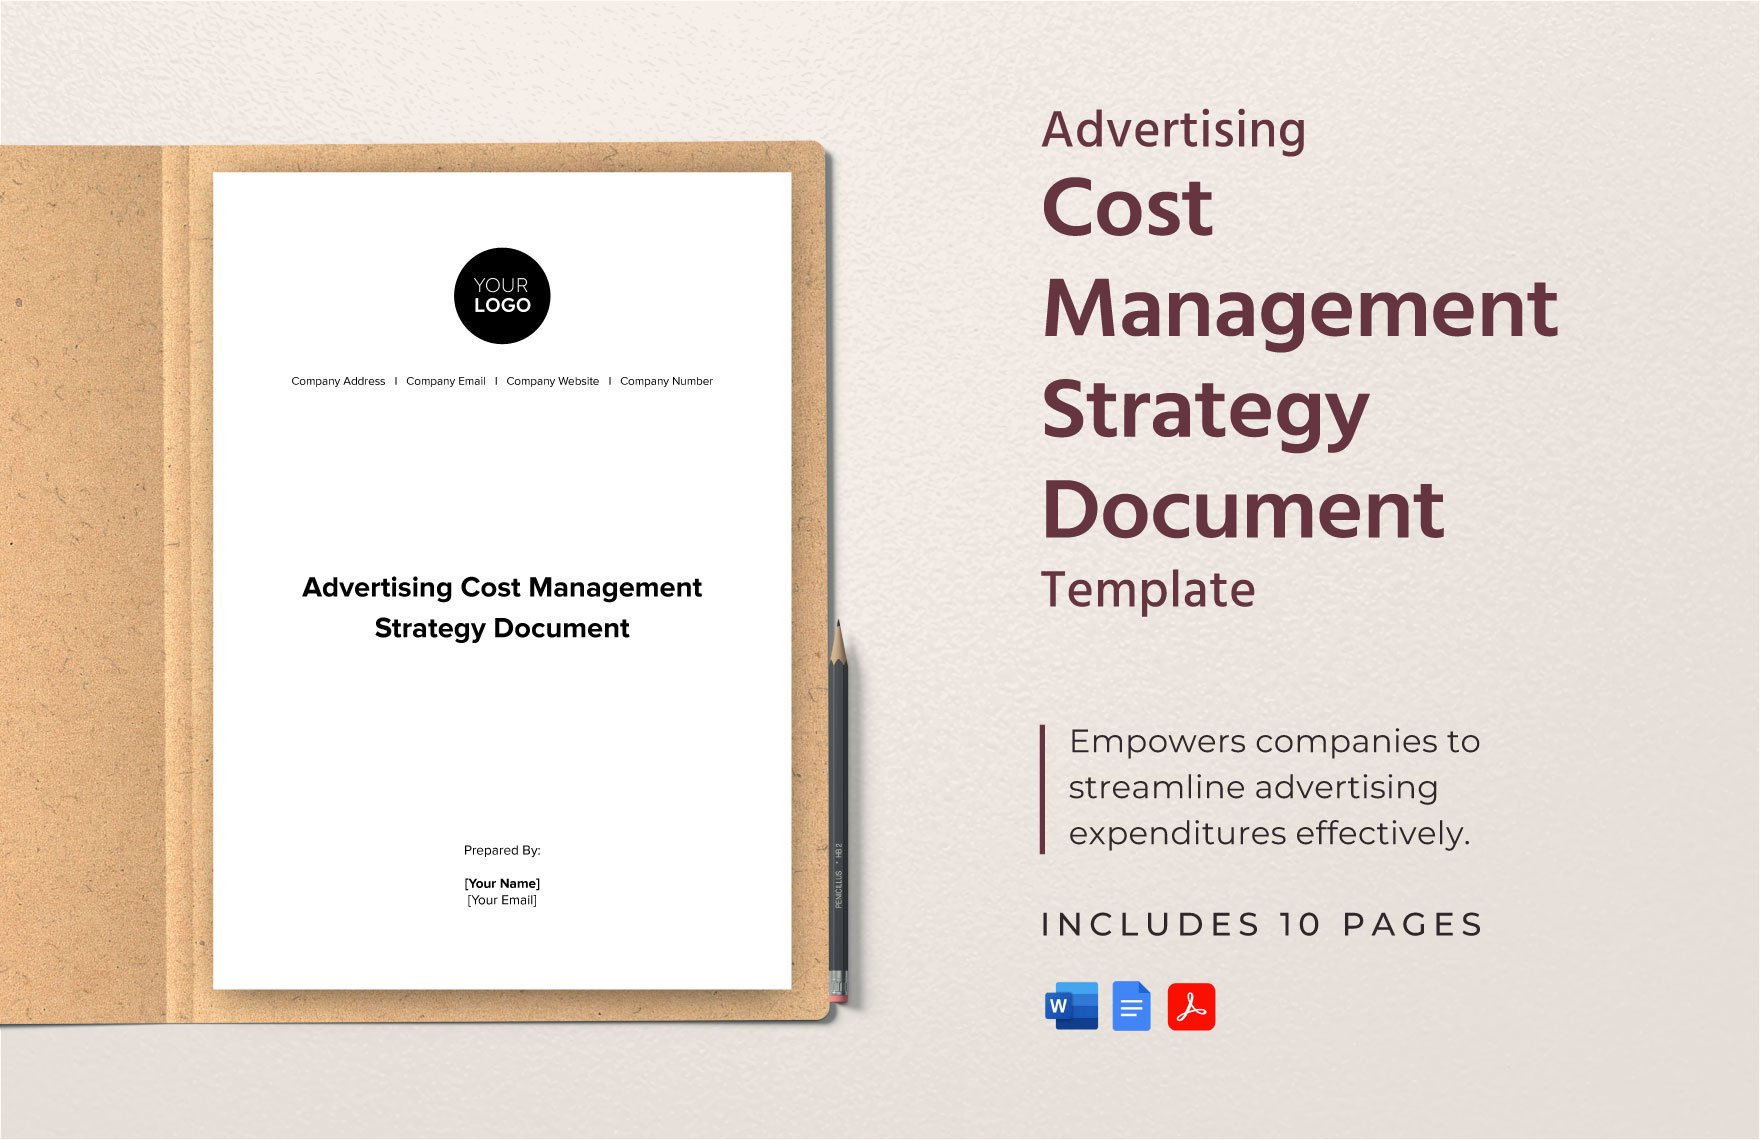 Advertising Cost Management Strategy Document Template